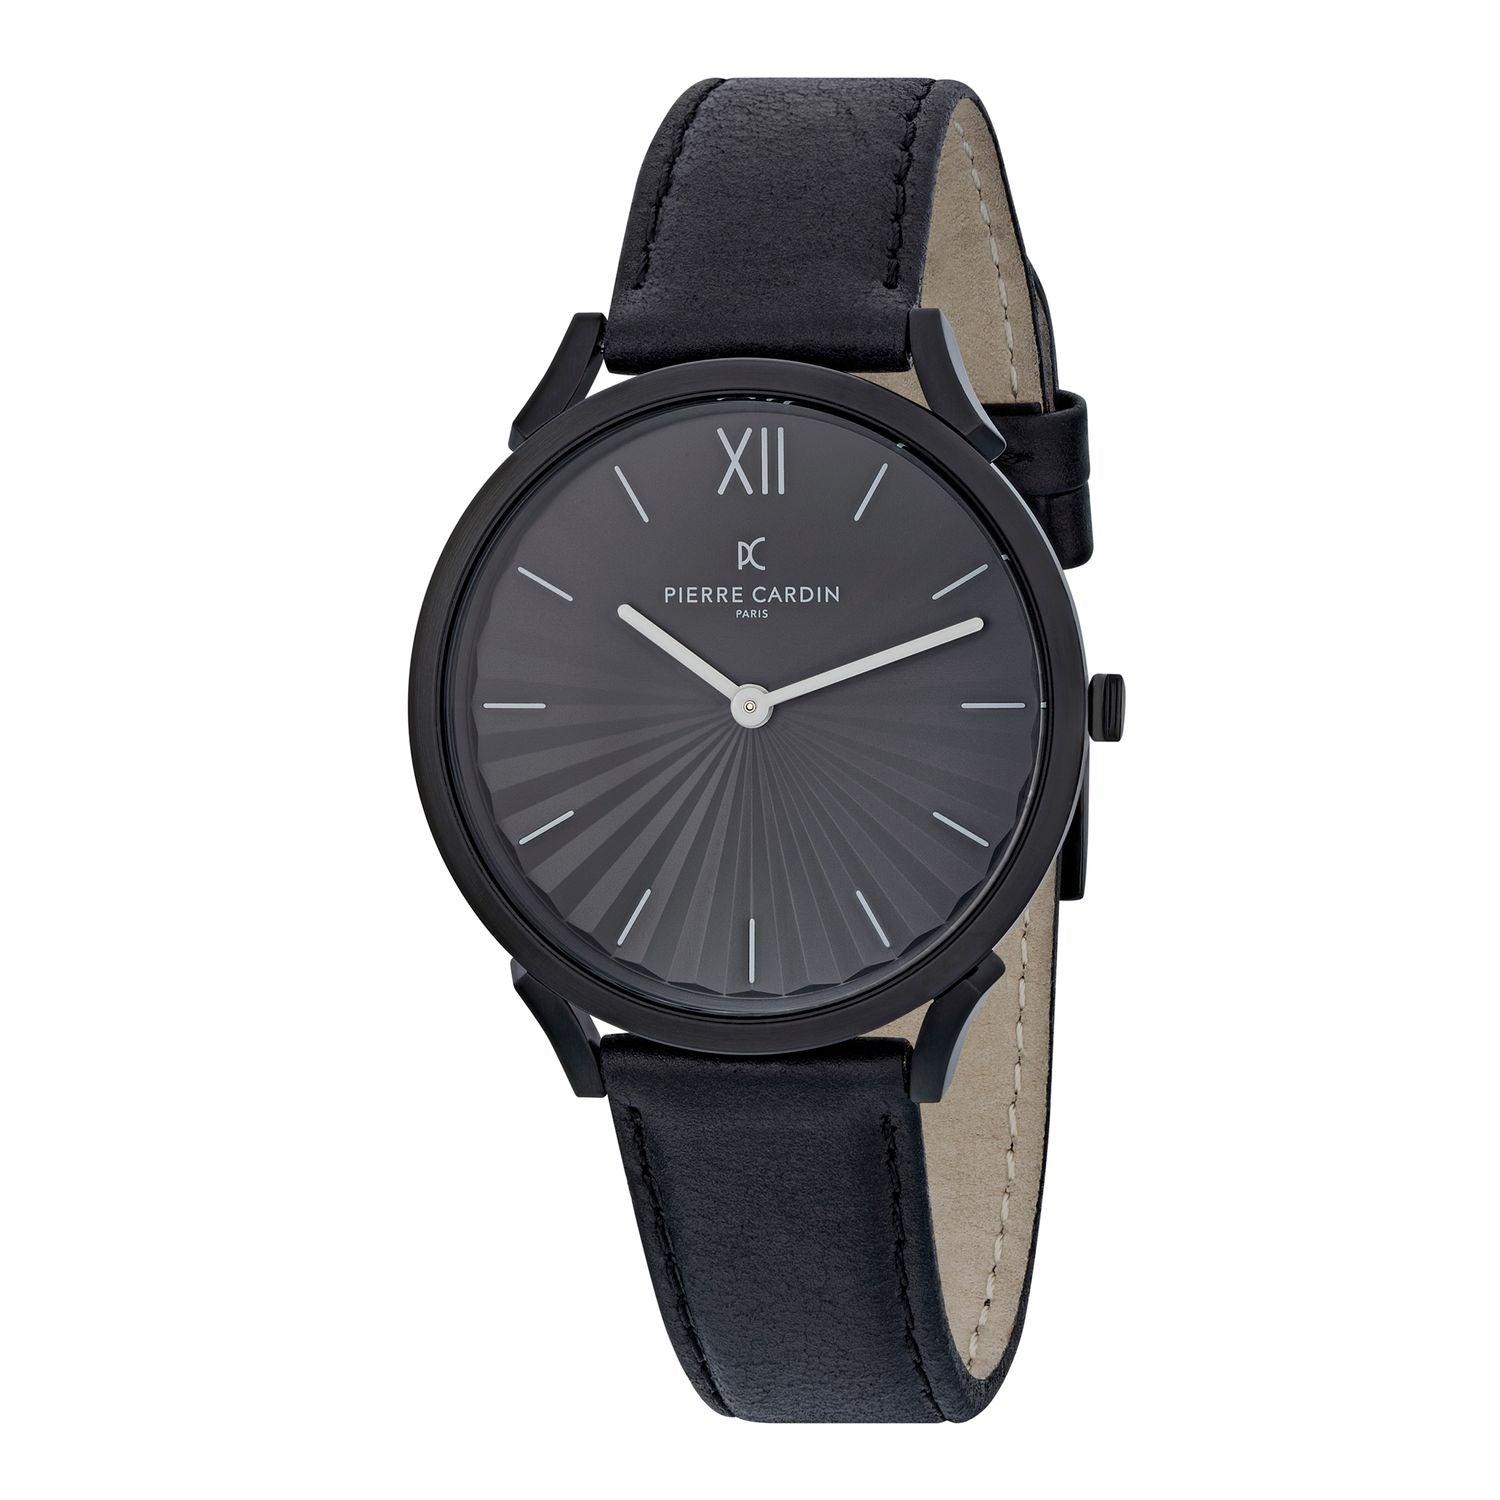 Pierre Cardin Leather Watches in Black (Gray) for Men - Save 26% | Lyst